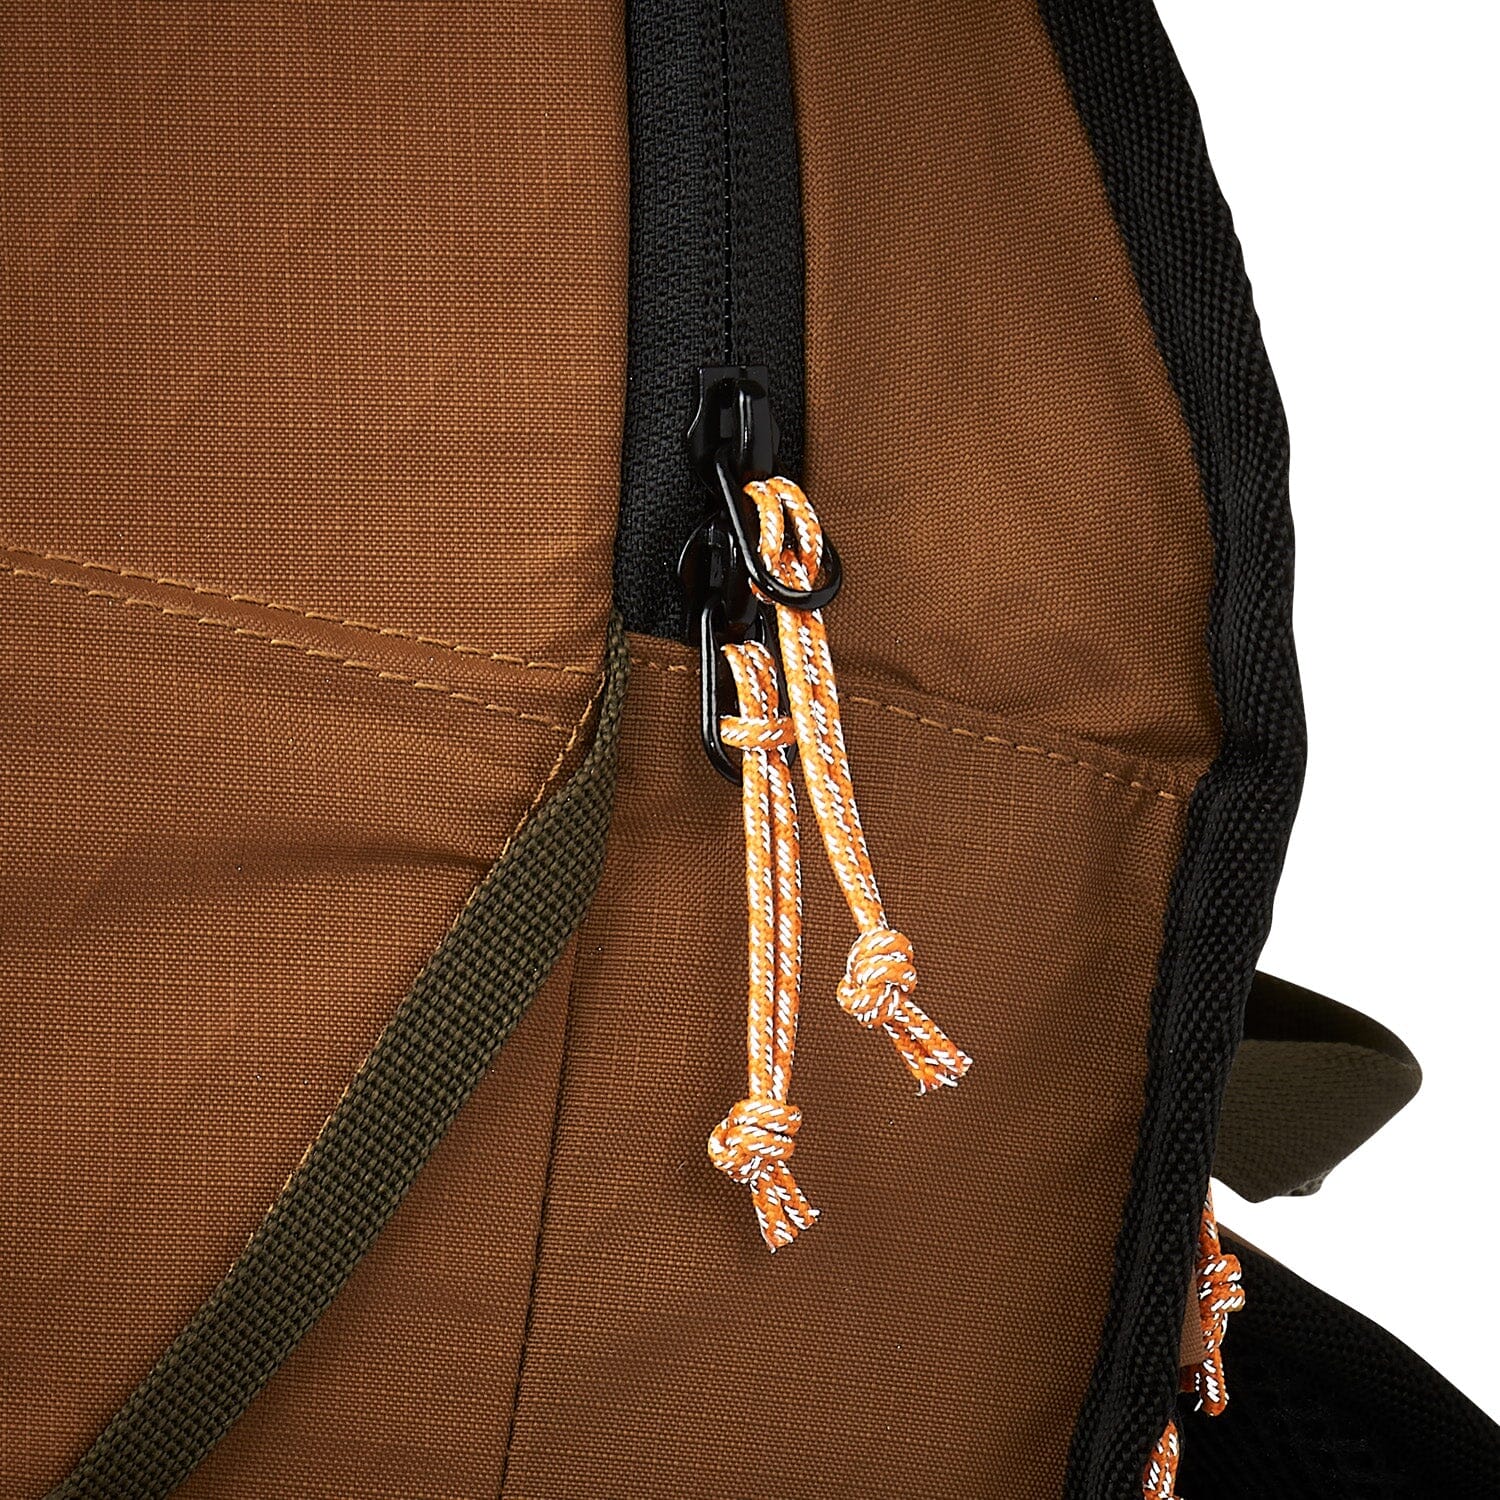 Aevor - Daypack Backpack - Made from Recycled PET-bottles - Weekendbee - sustainable sportswear